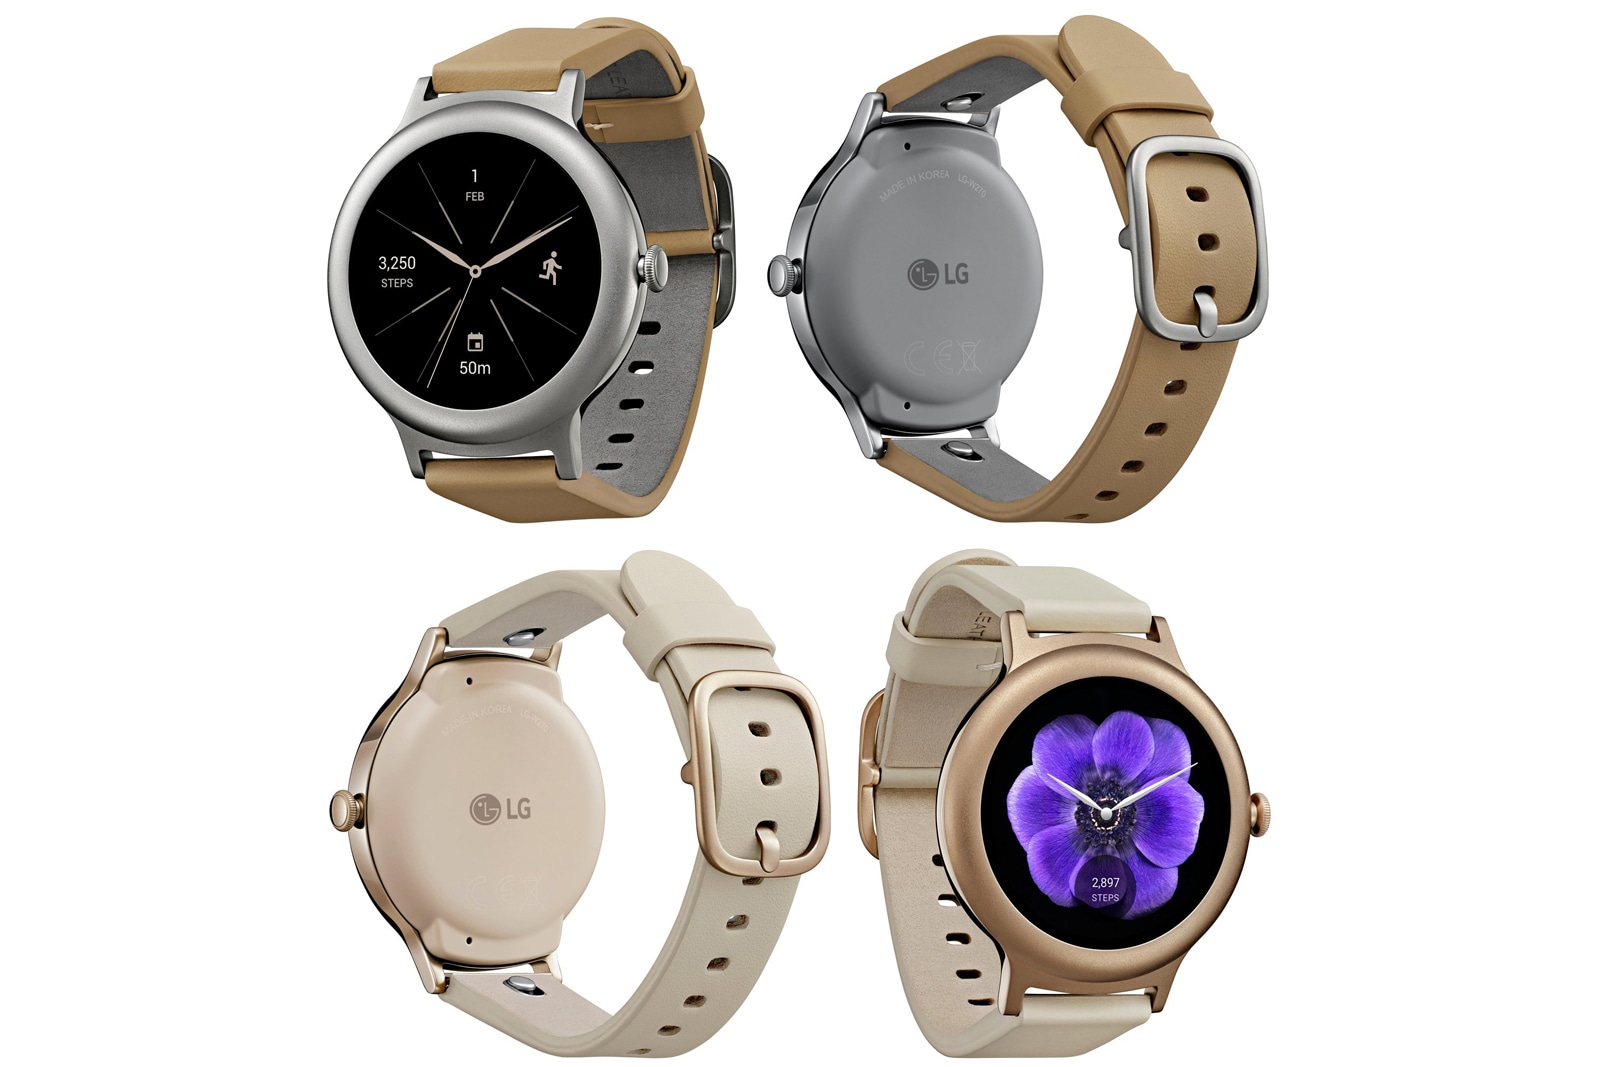 LG's Nexus-like Watch Style surfaces in photos